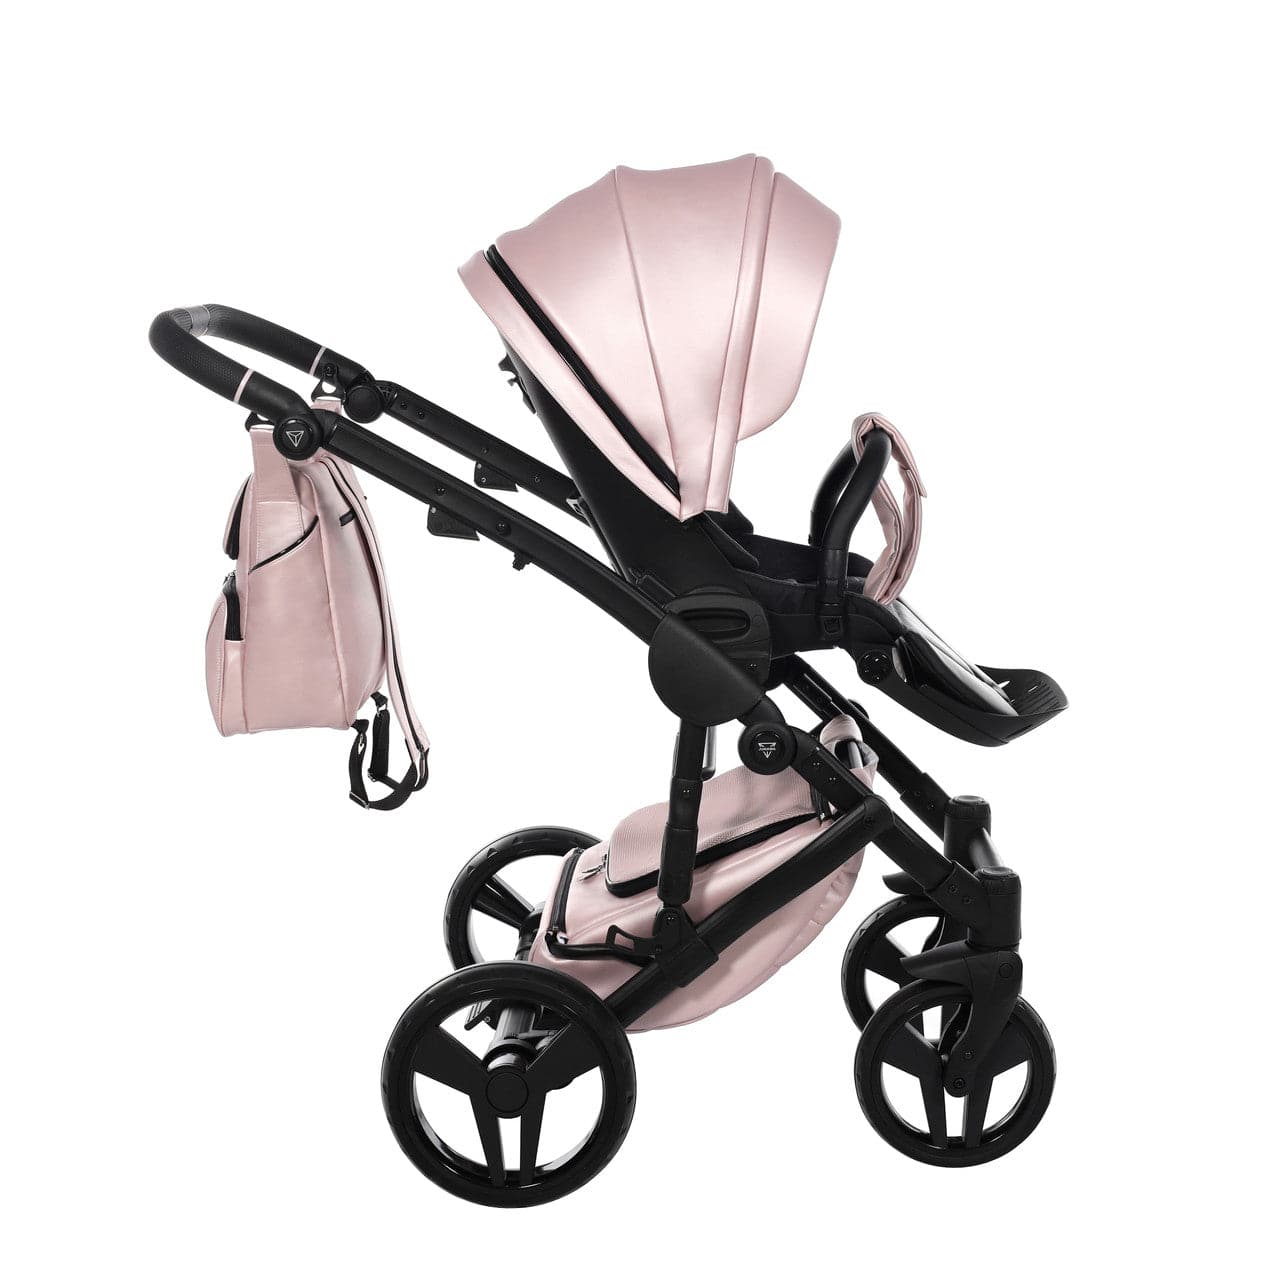 Junama S-Class 2 In 1 Pram - Pink - For Your Little One